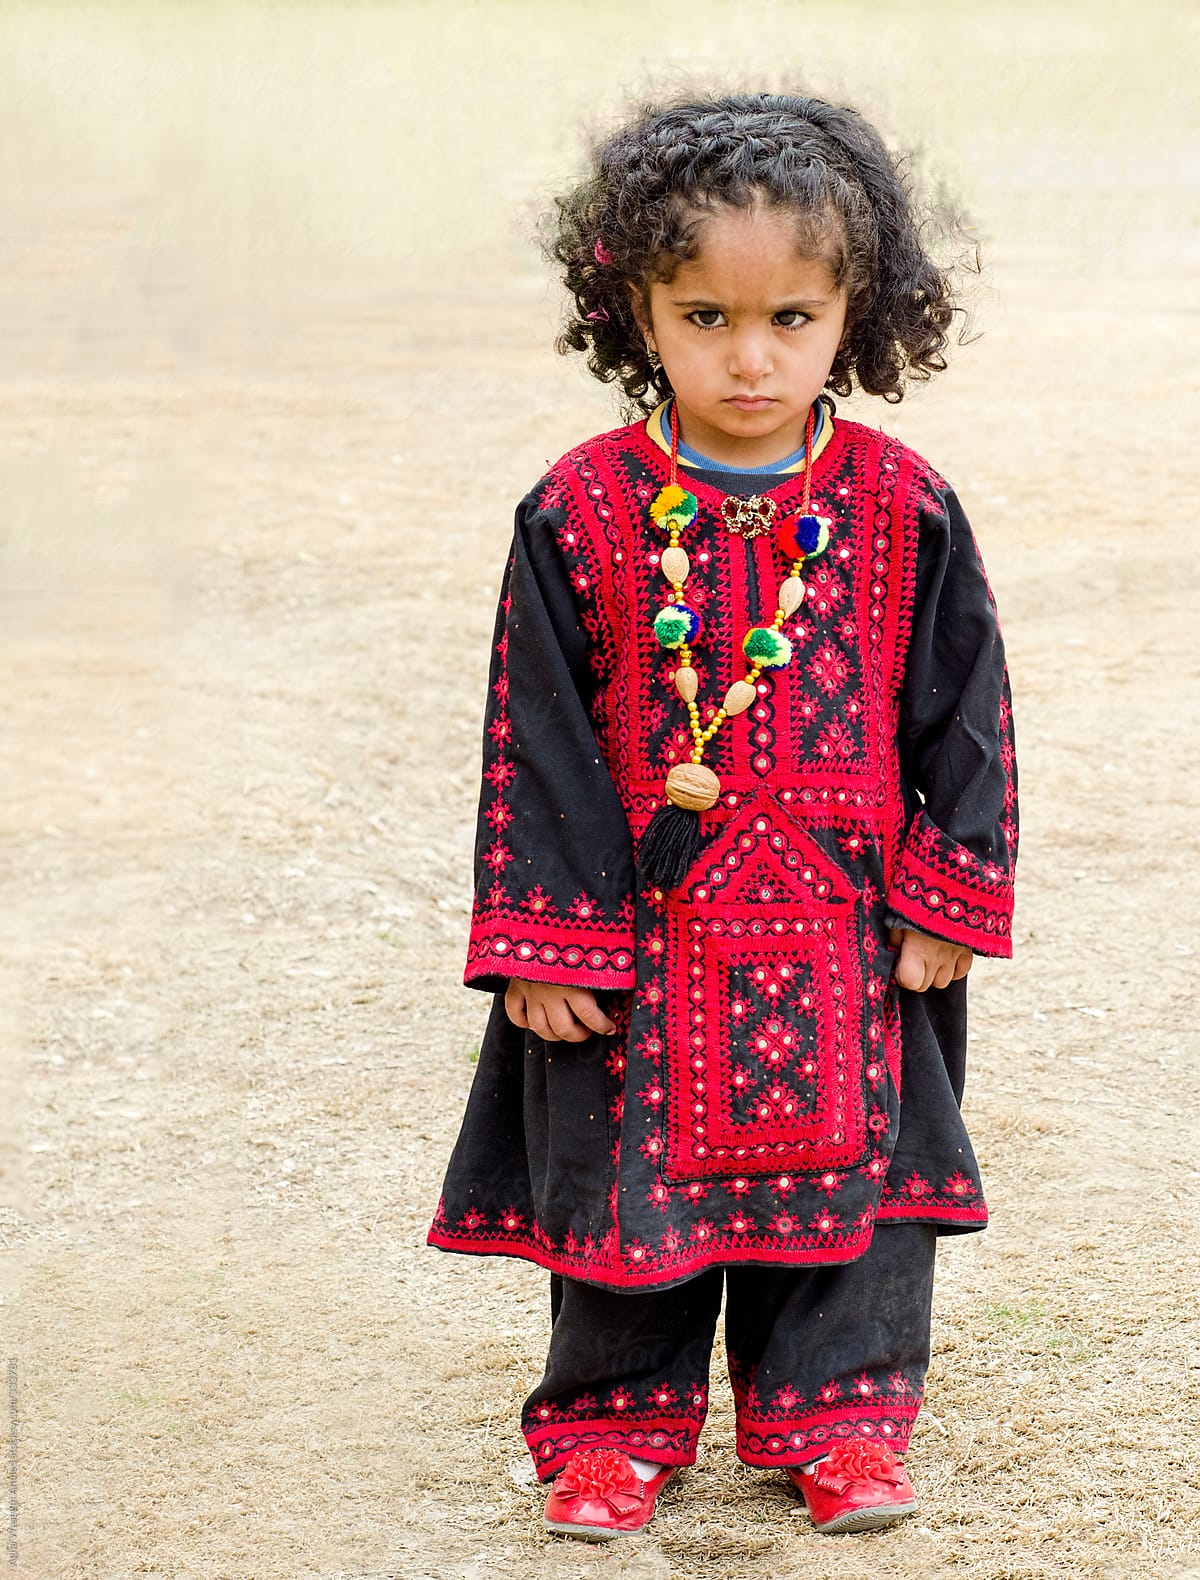 The Stories And Legends Woven Into Every Balochi Girl Dress